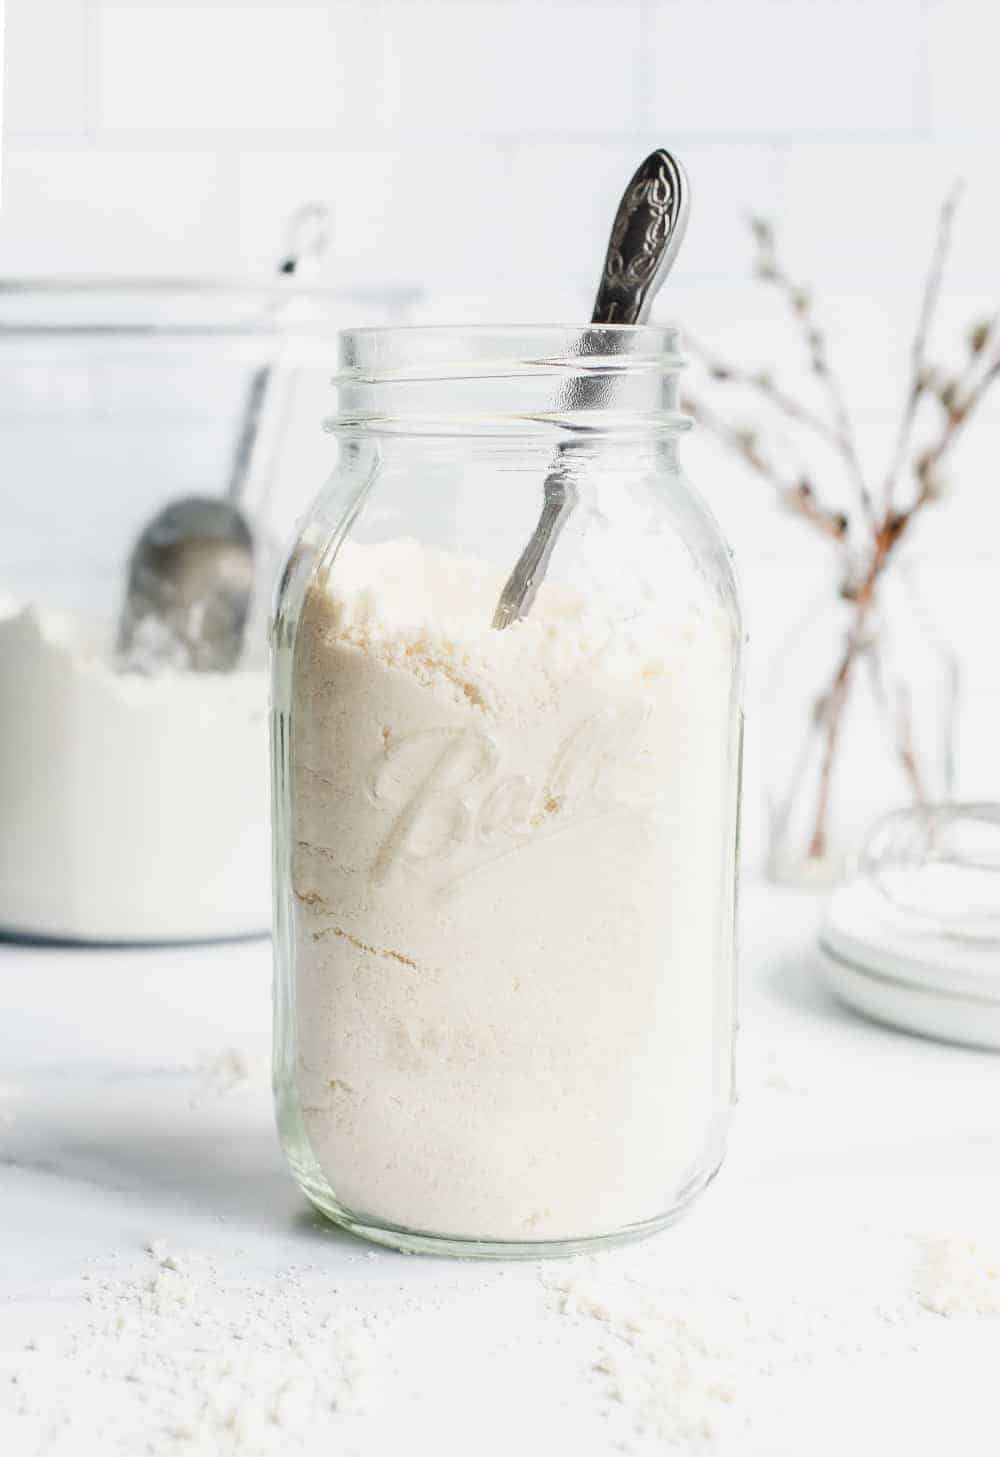 Glass jar of homemade bisquick mix on a white countertop in front of a canister of flour